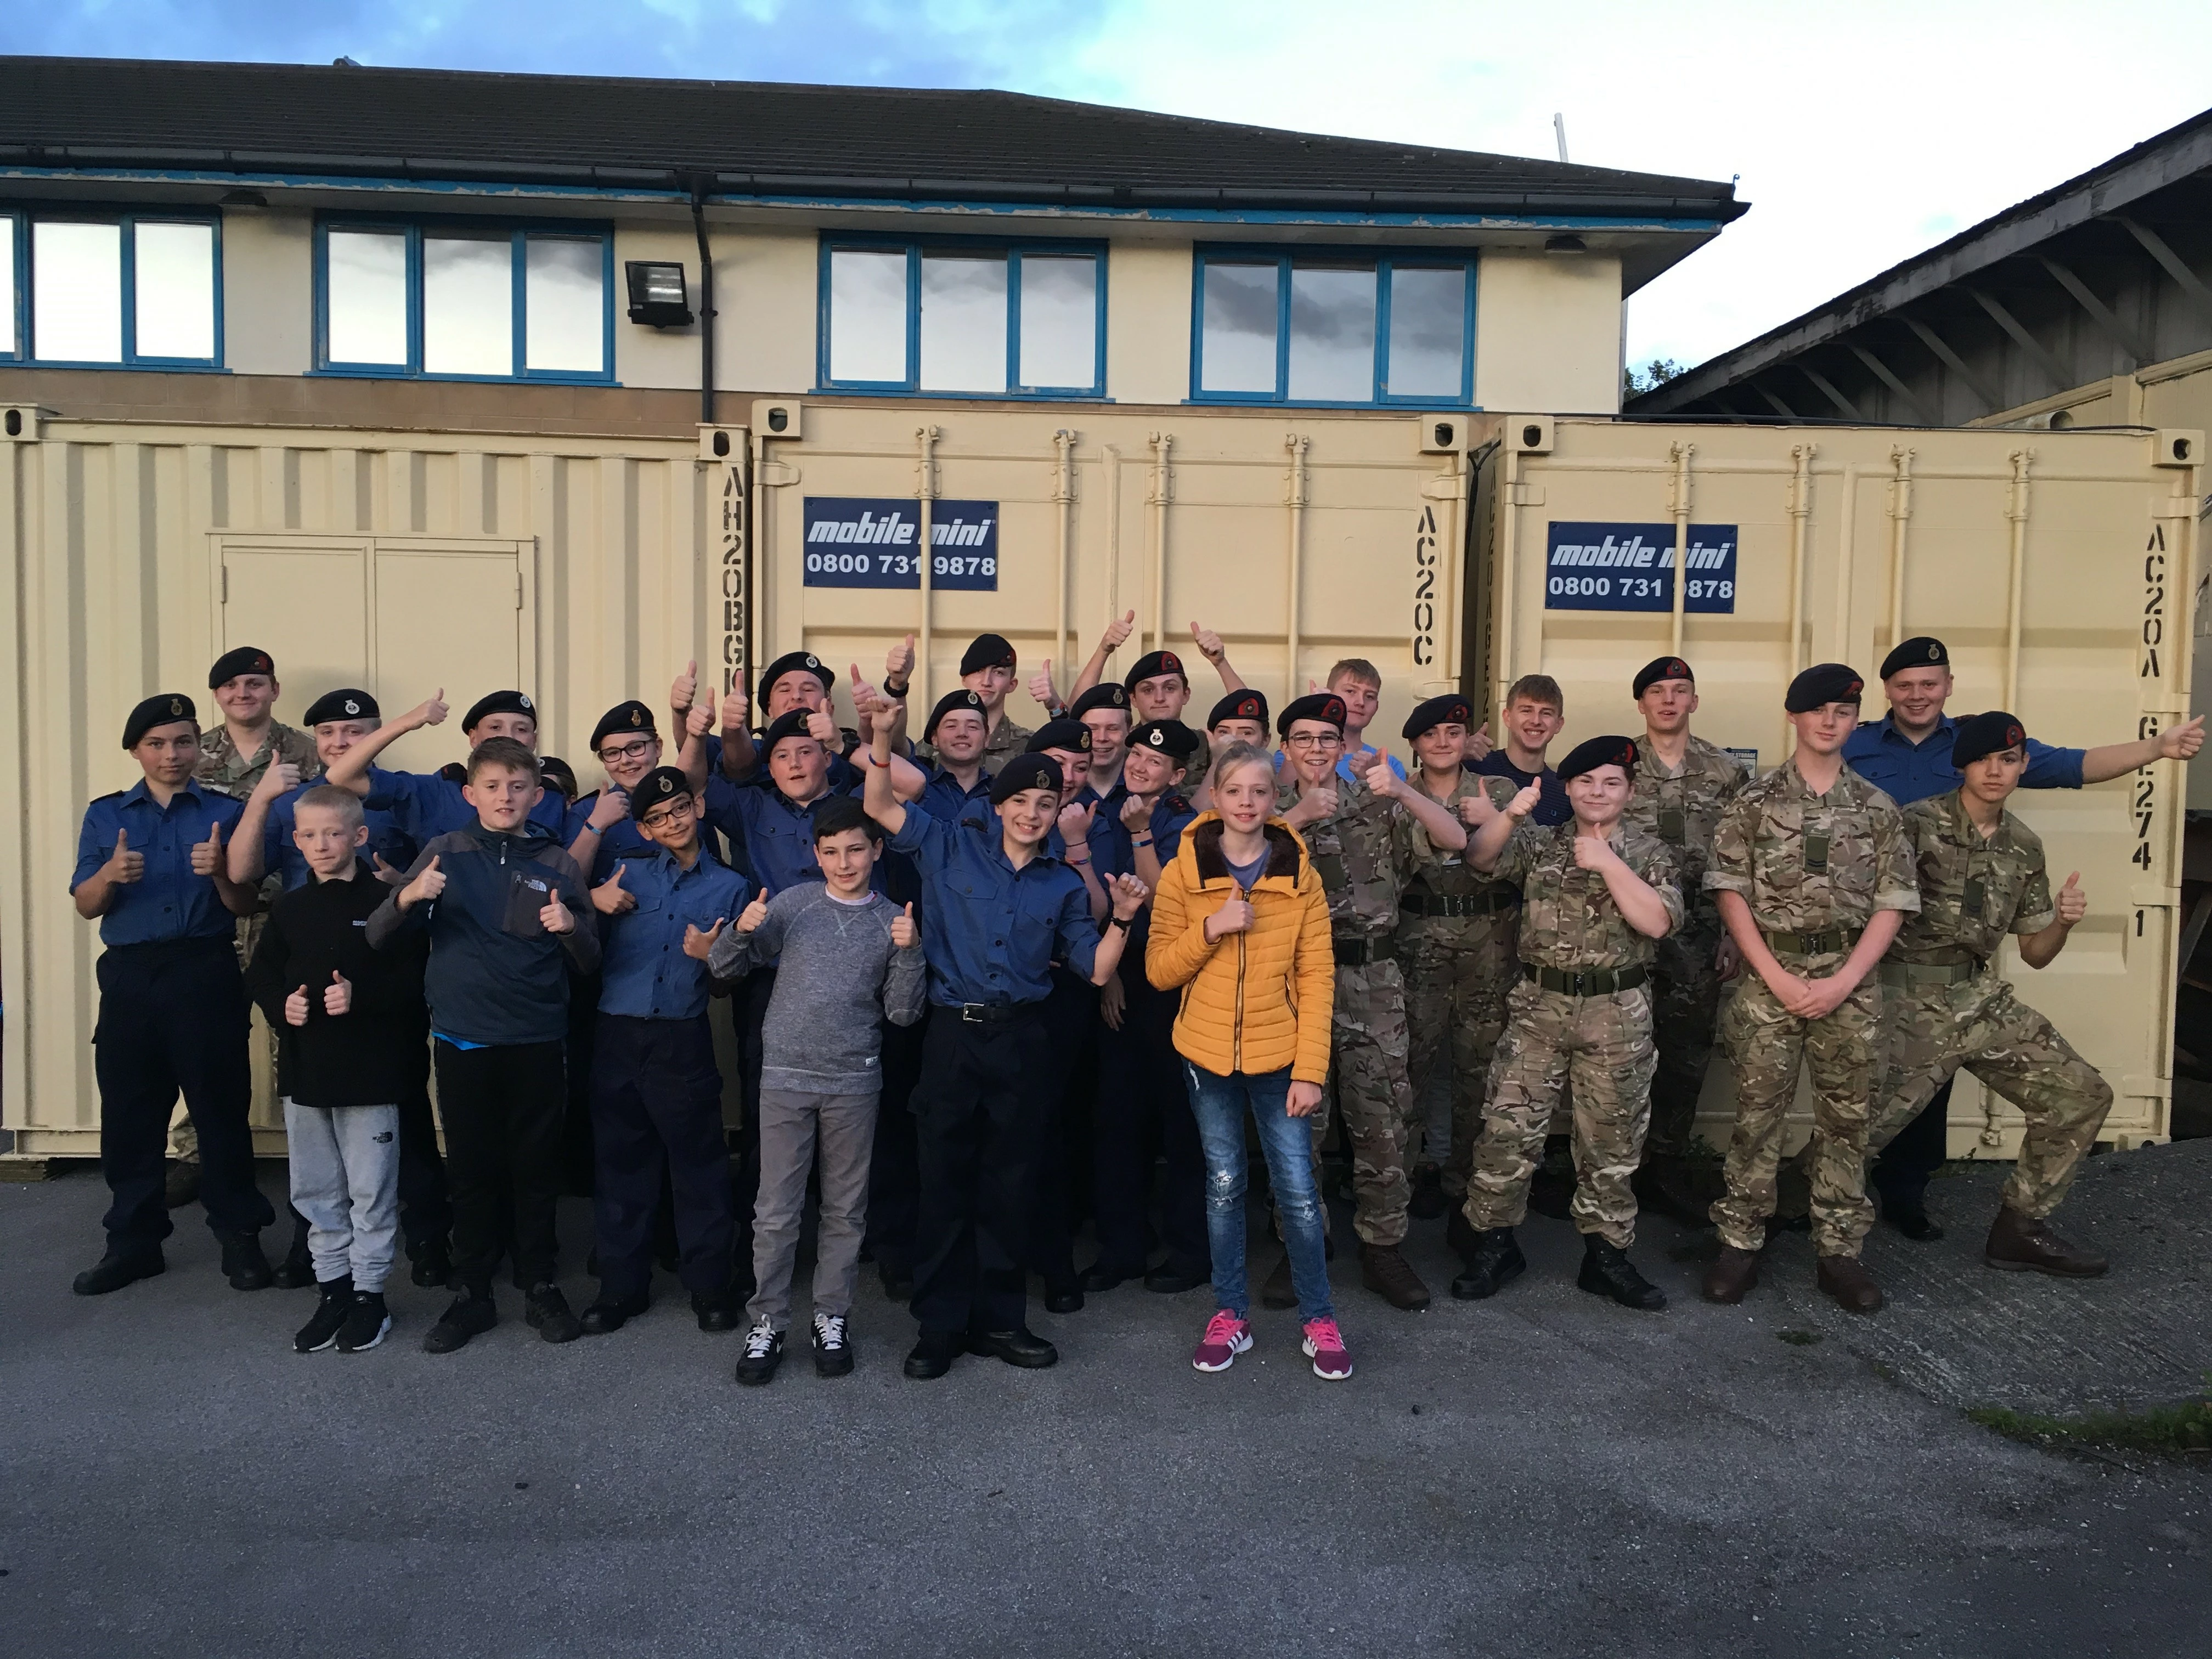 Preston Sea Cadets celebrating the arrival of the secure containers